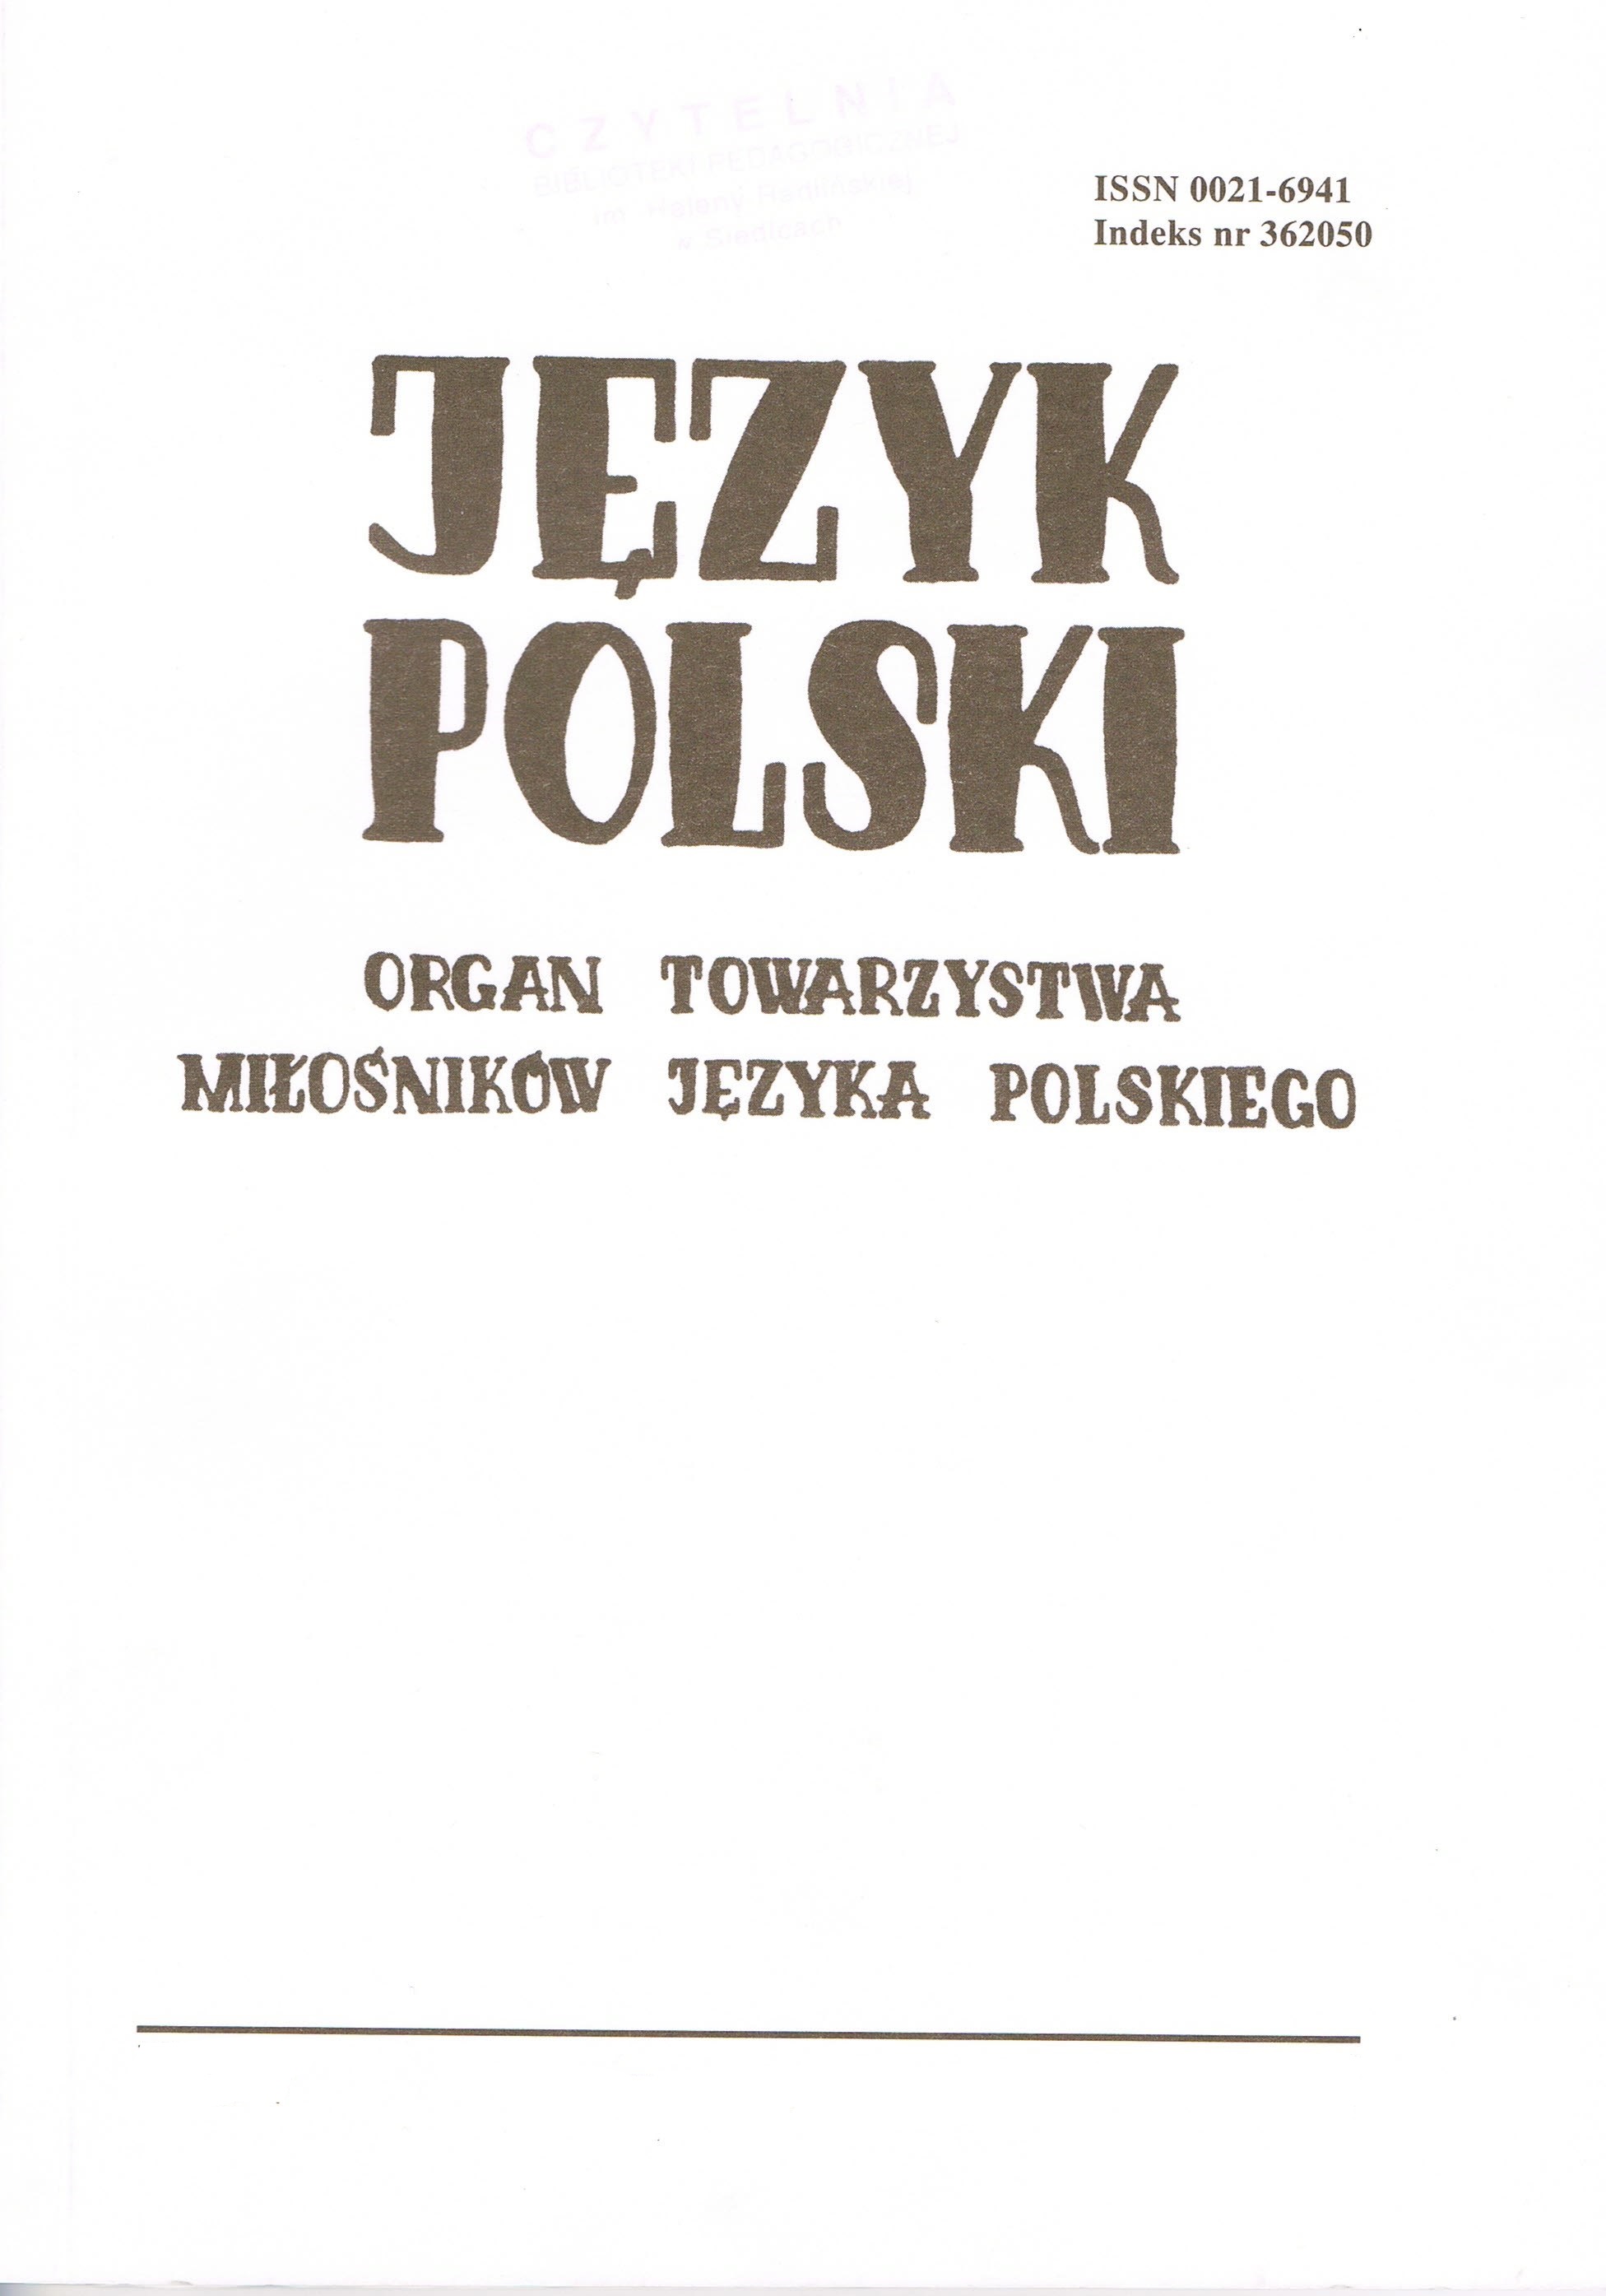 Polish Academy of Sciences Great Dictionary of Polish as an electronic dictionary Cover Image